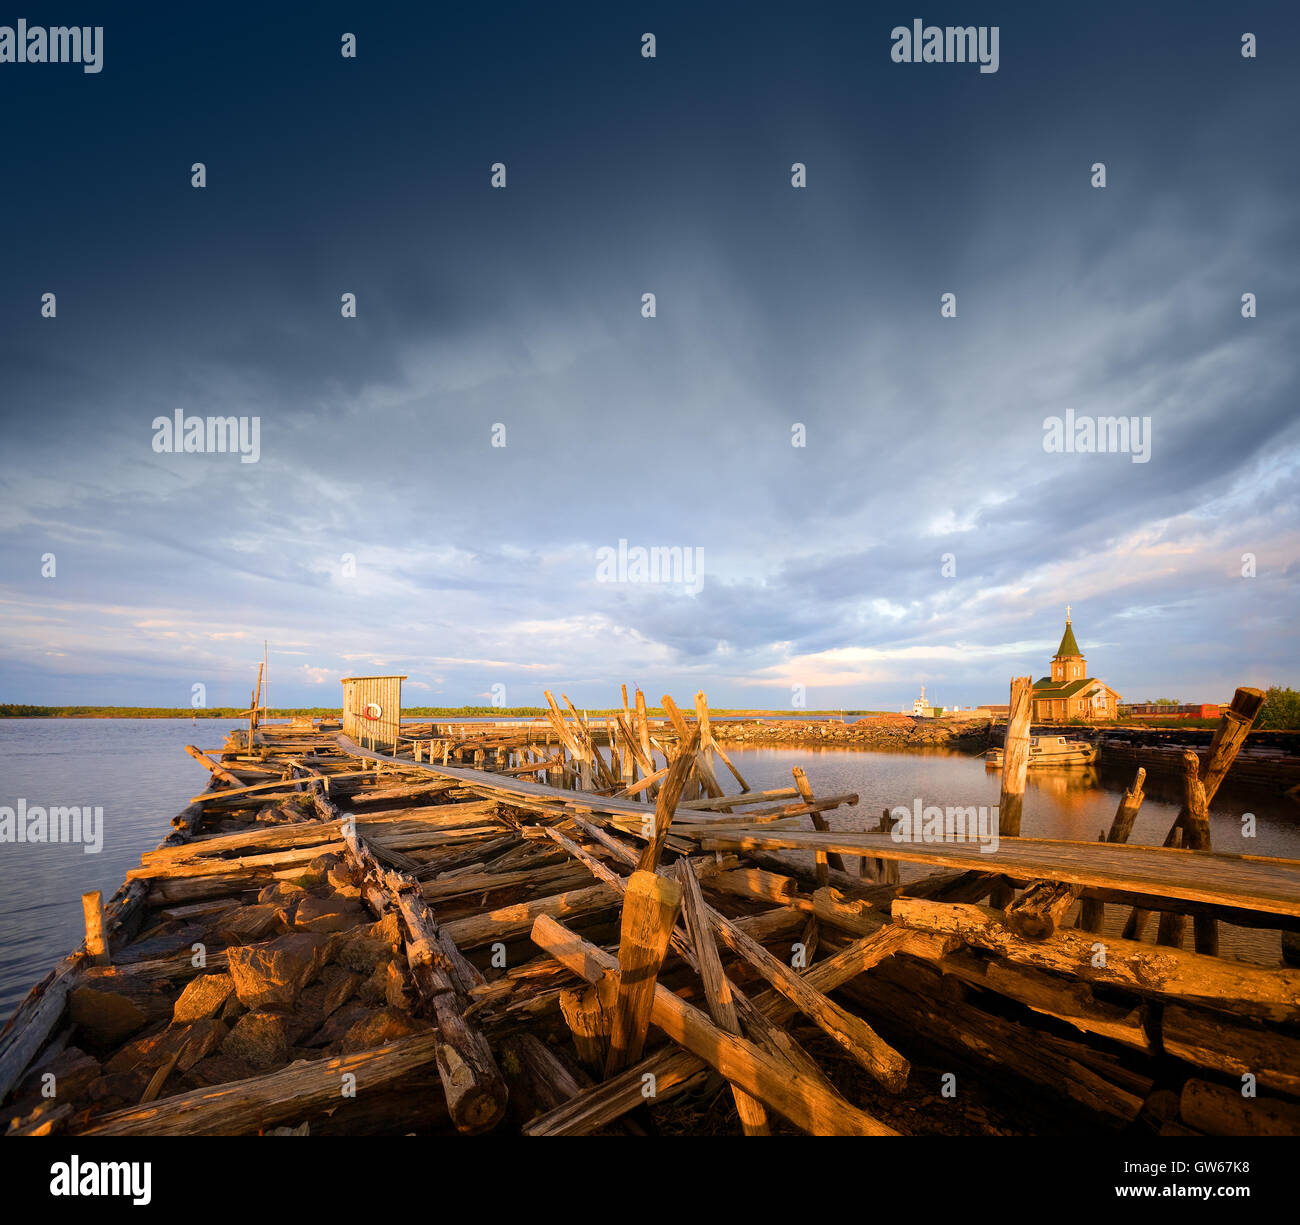 Old wooden pier at sunset. Stock Photo